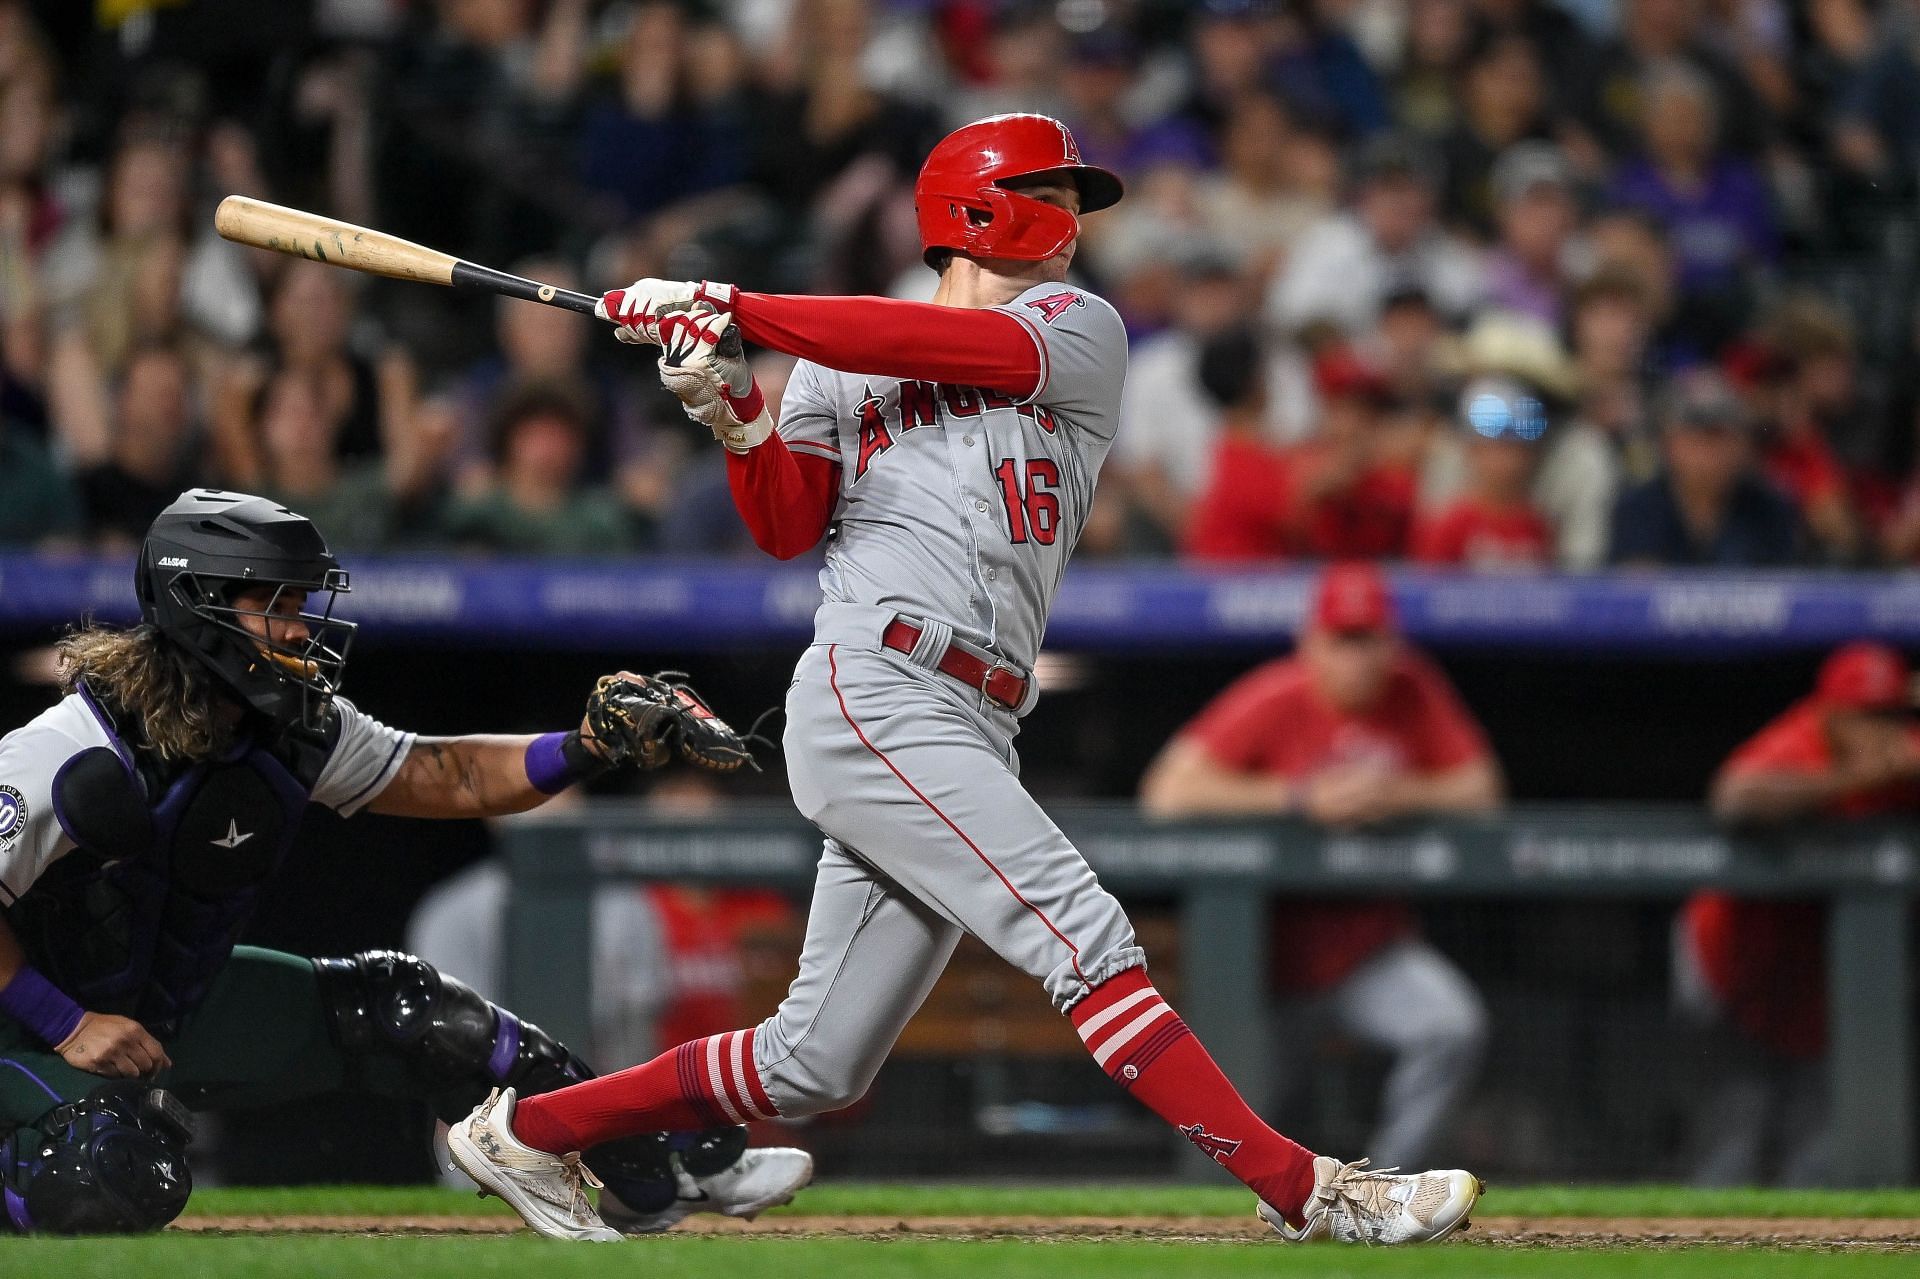 Mickey Moniak of the Los Angeles Angels hits a double against the Colorado Rockies at Coors Field